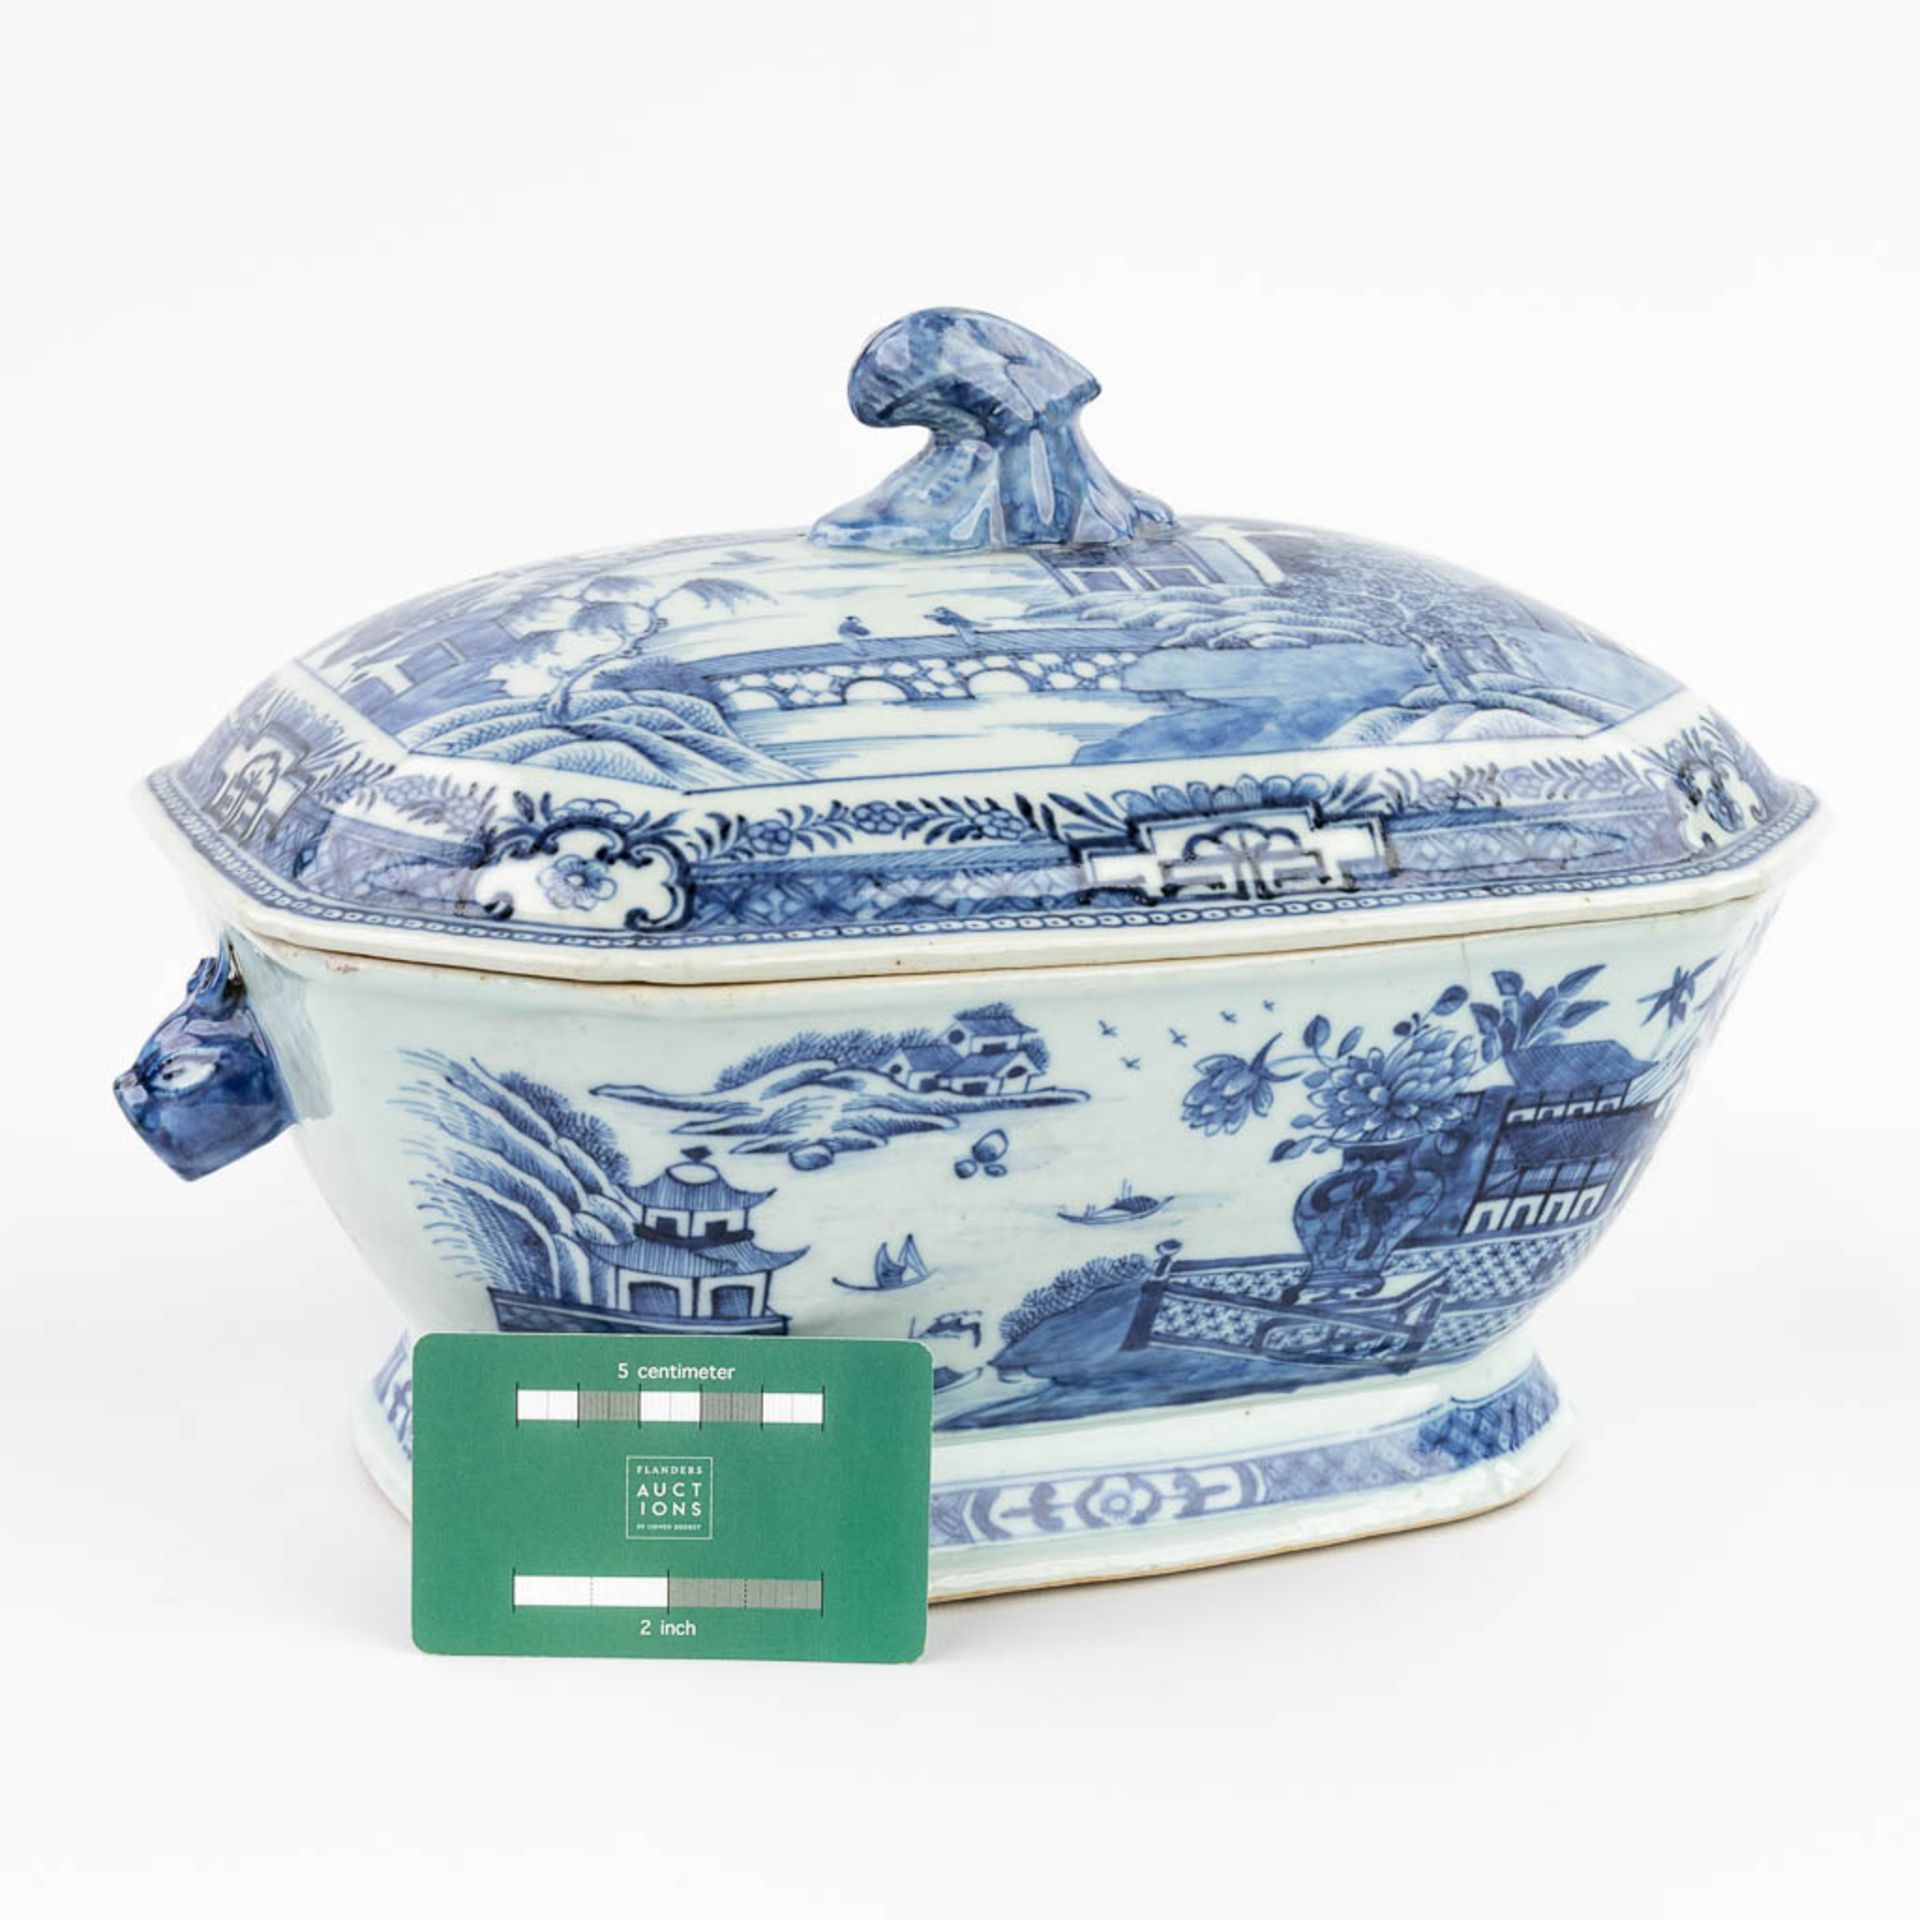 A Chinese soup tureen made of blue-white porcelain. (22 x 31 x 22 cm) - Image 11 of 15